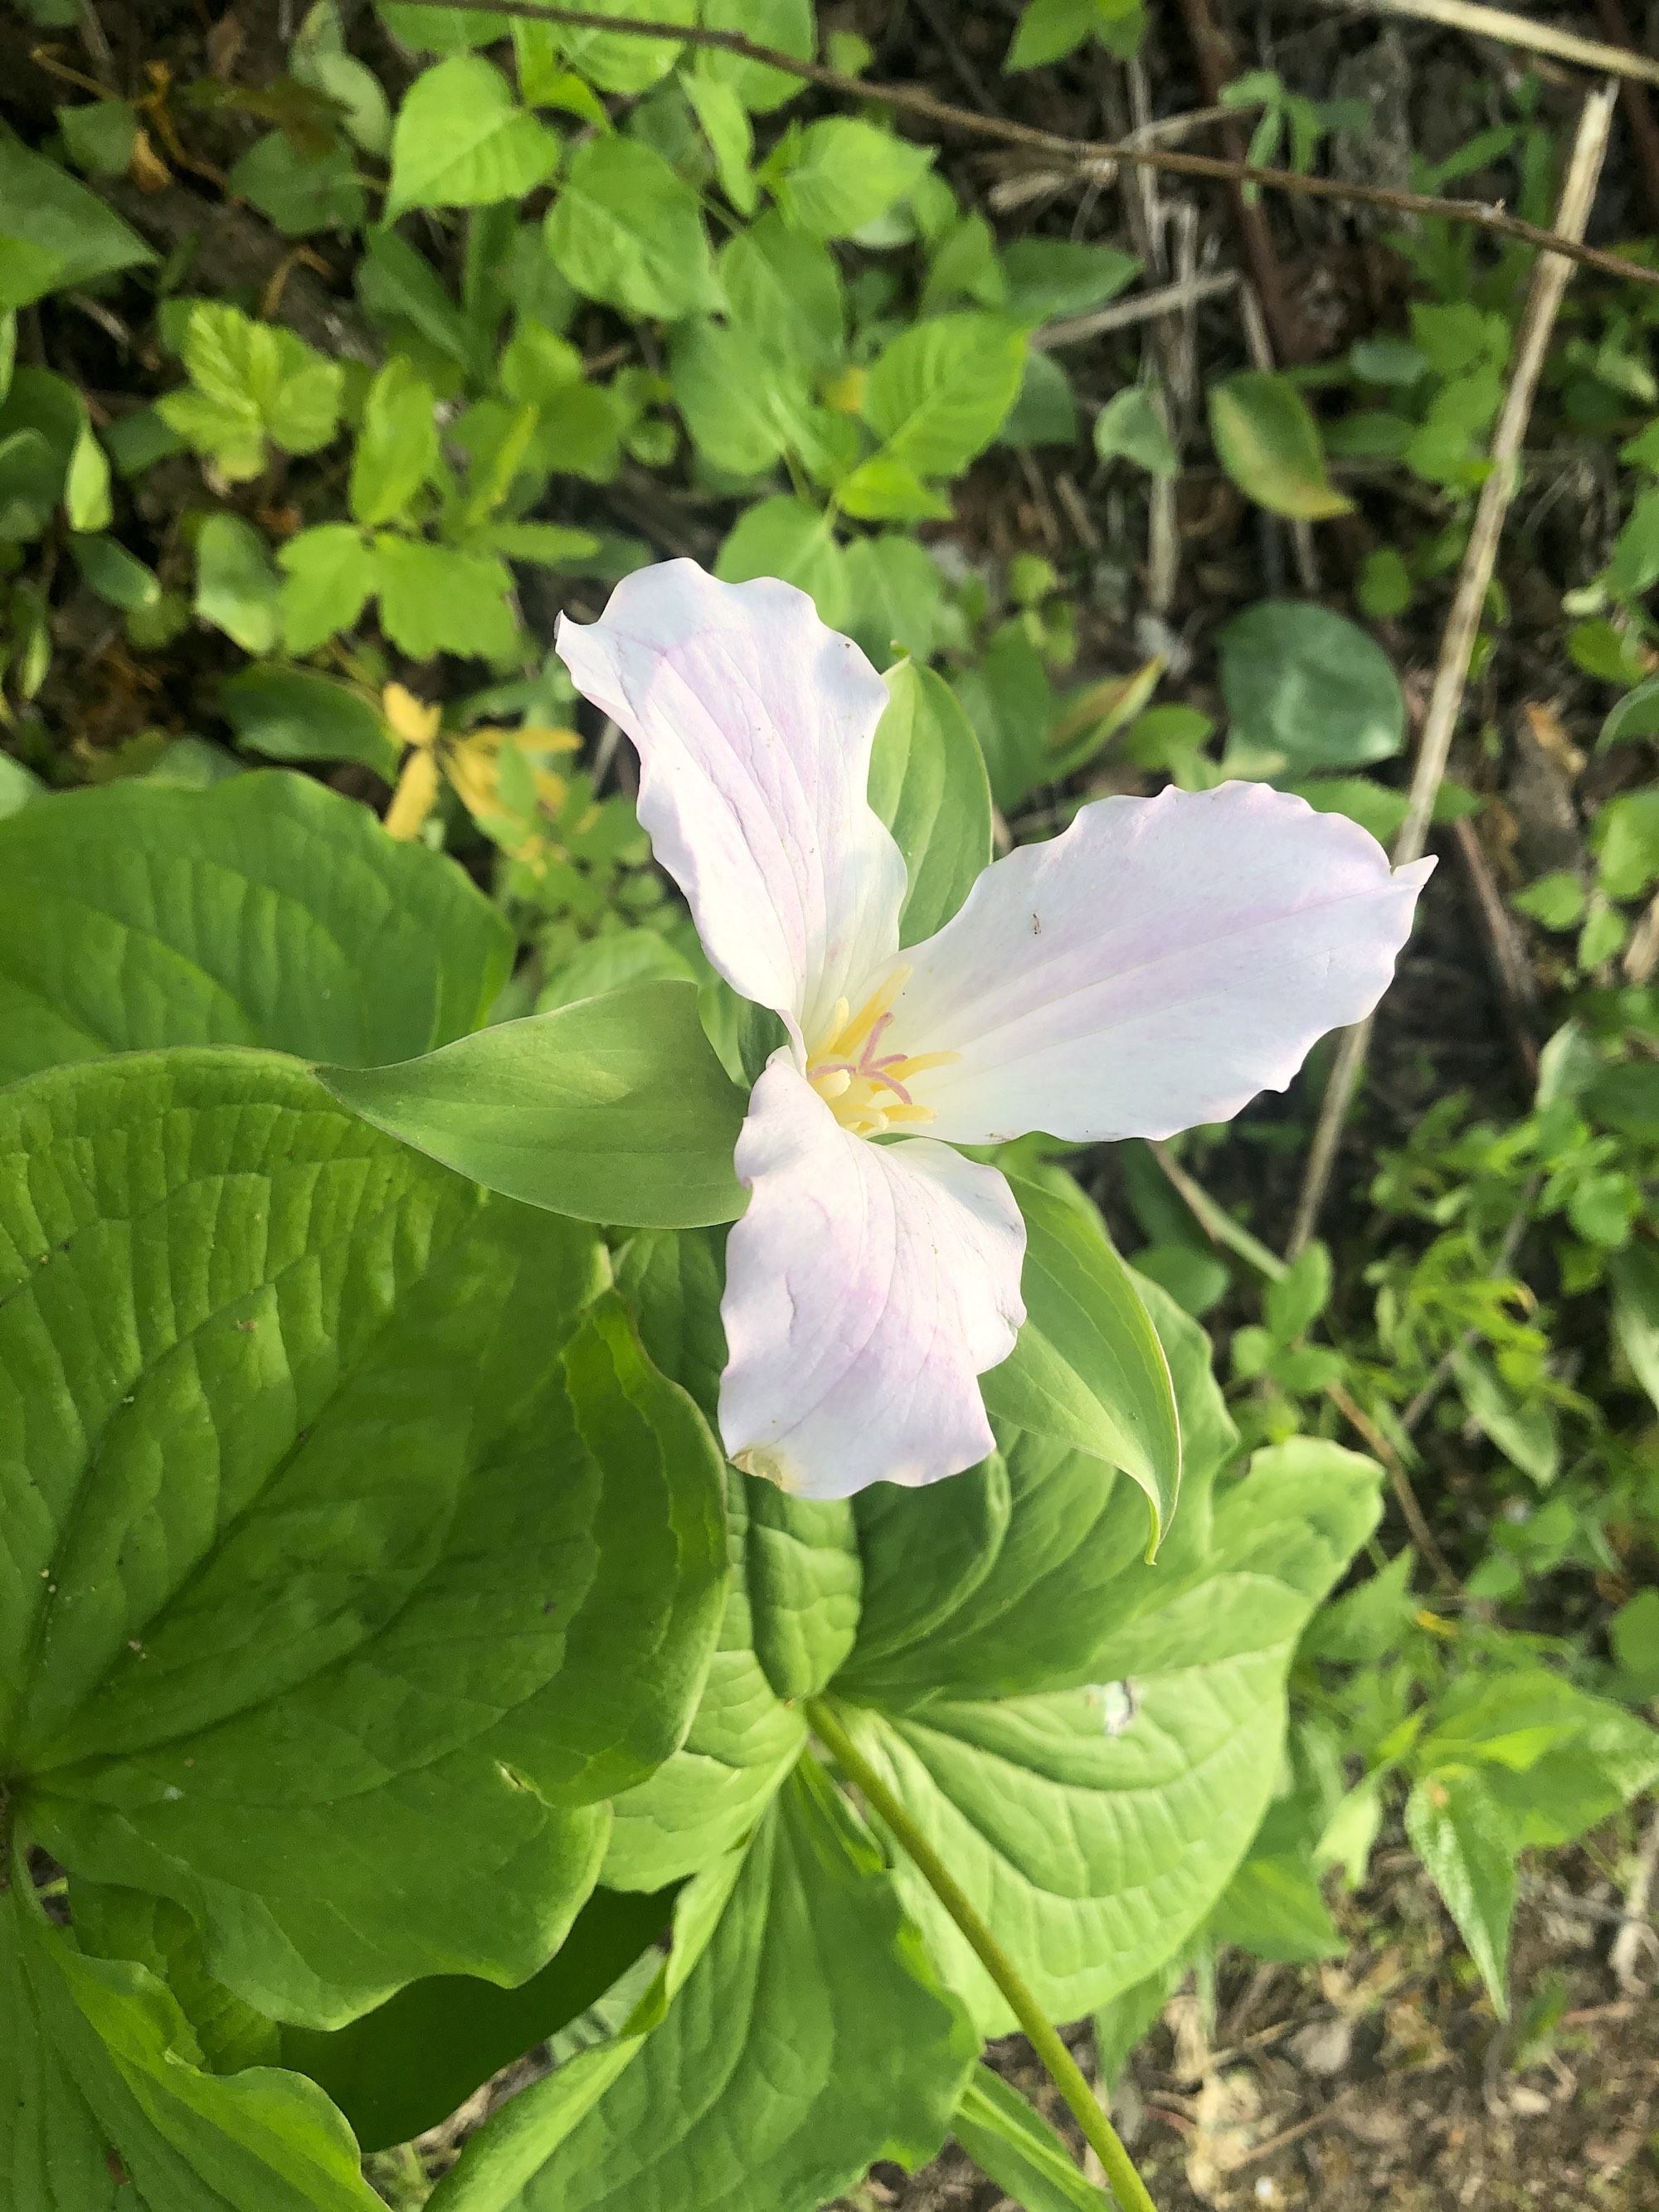 Great White Trillium by Council Ring in Madison, Wisconsin on May 2, 2021.